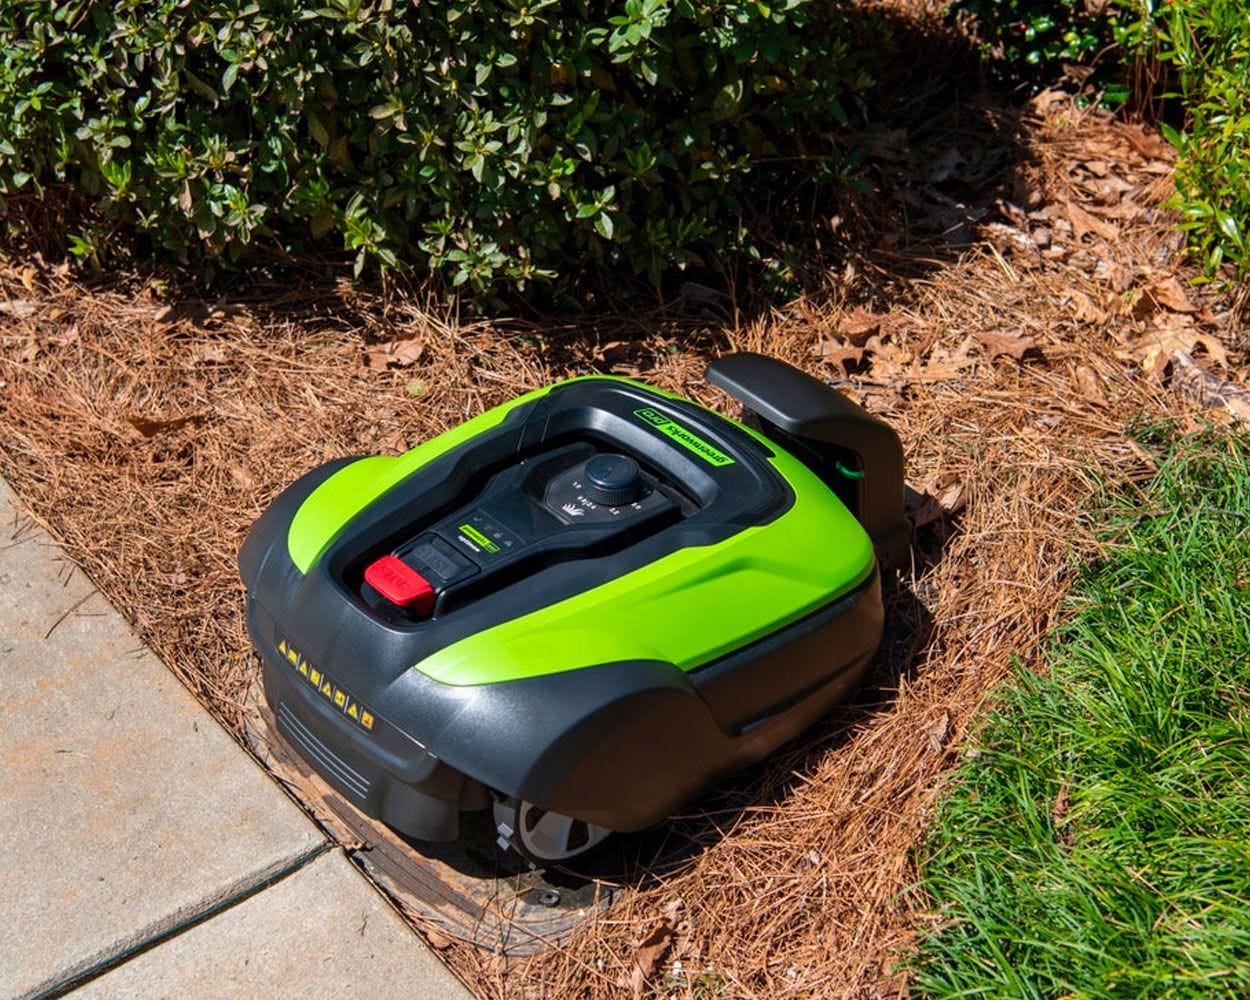 Robotic Lawn Mowers, Battery Powered & Operated